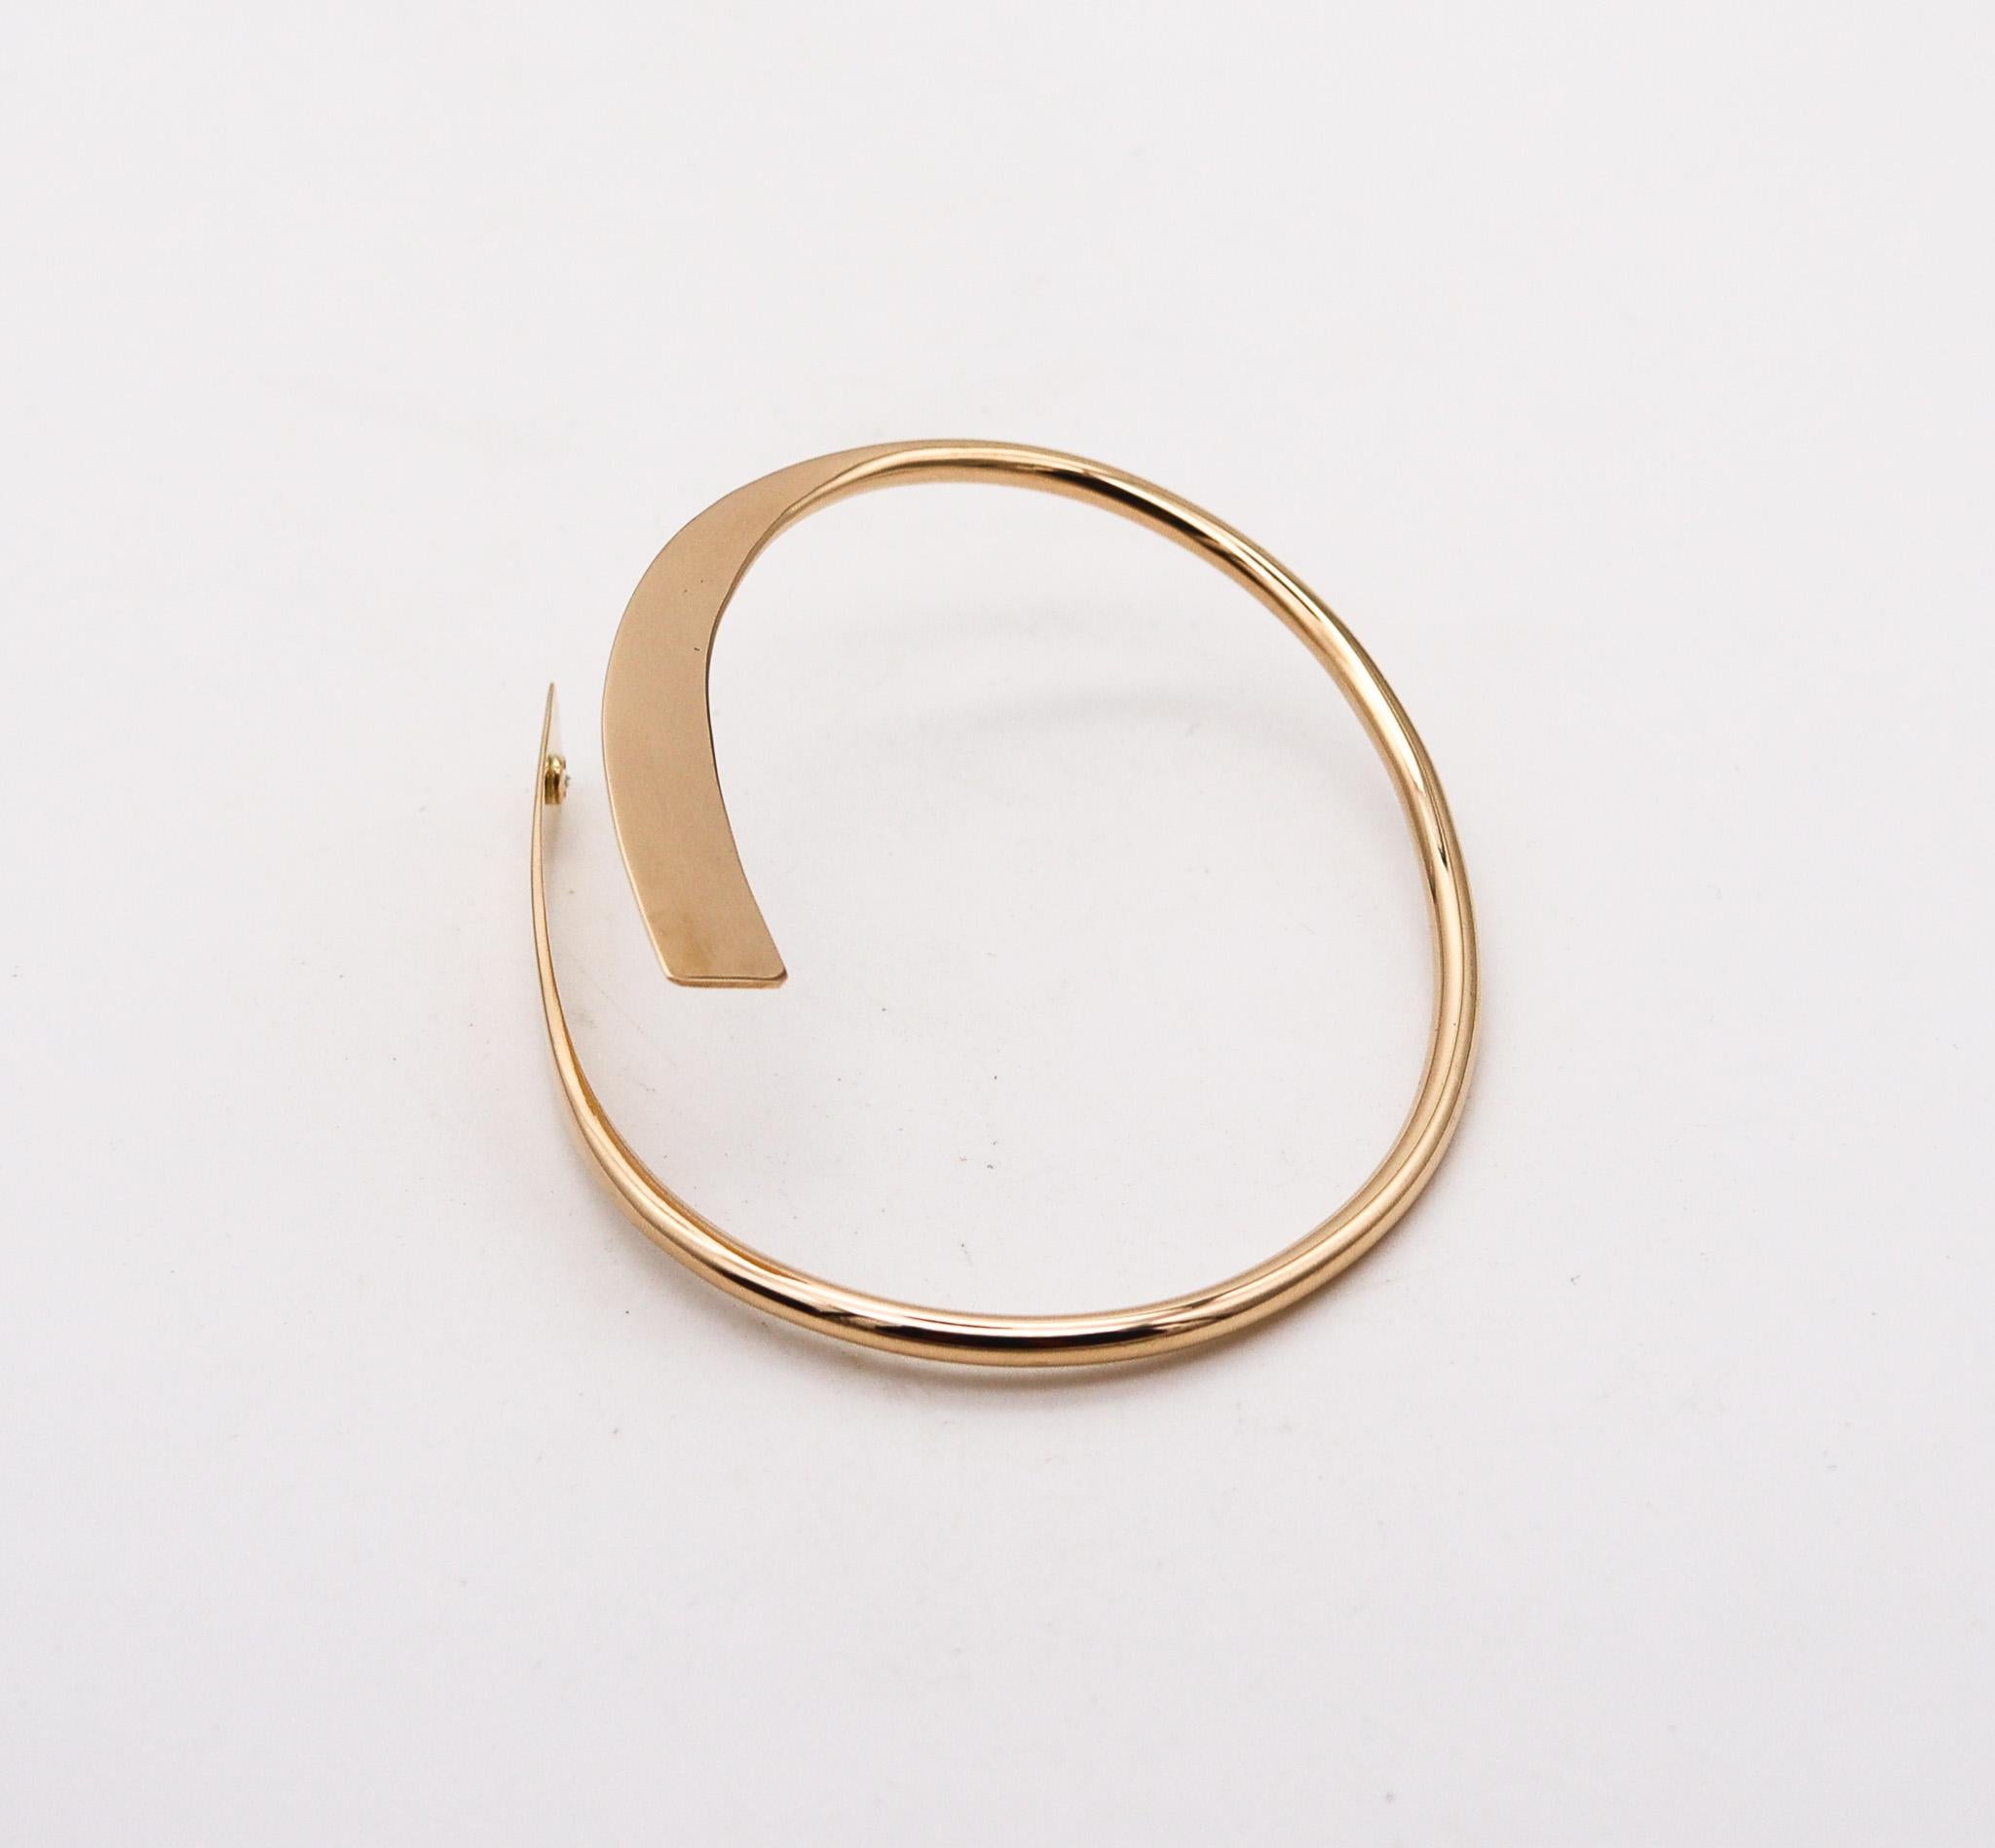 Brilliant Cut Betty Cooke 1990 Asymmetrical Sculptural Bangle In 14Kt Gold With One Diamond For Sale